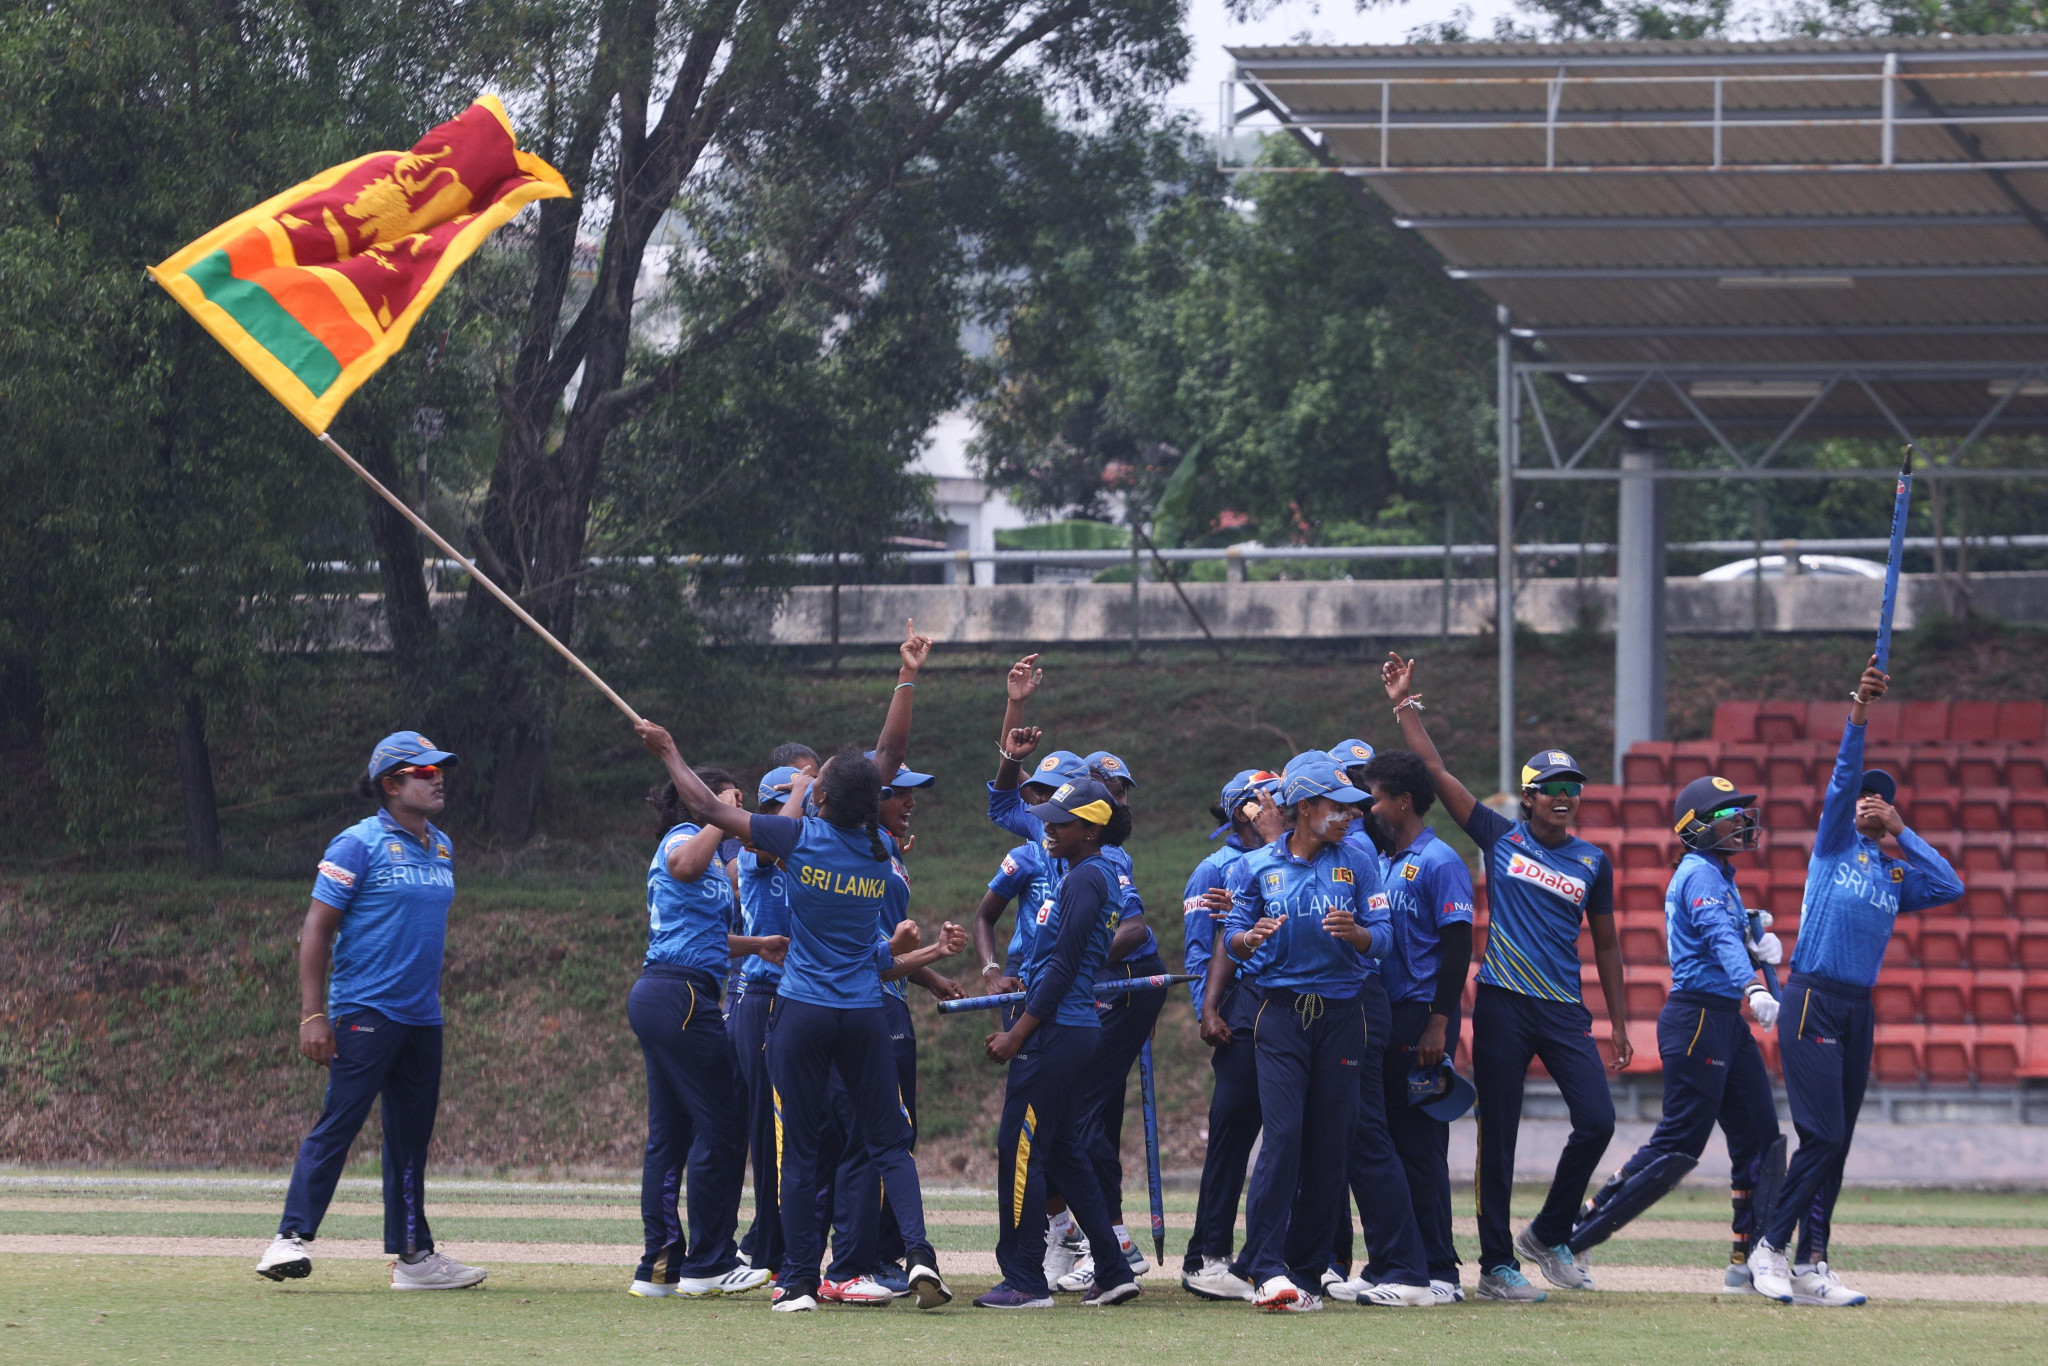 Sri Lanka have defeated Bangladesh in the Commonwealth Games T20 qualifying tournament to book their place at Birmingham 2022 ©ICC